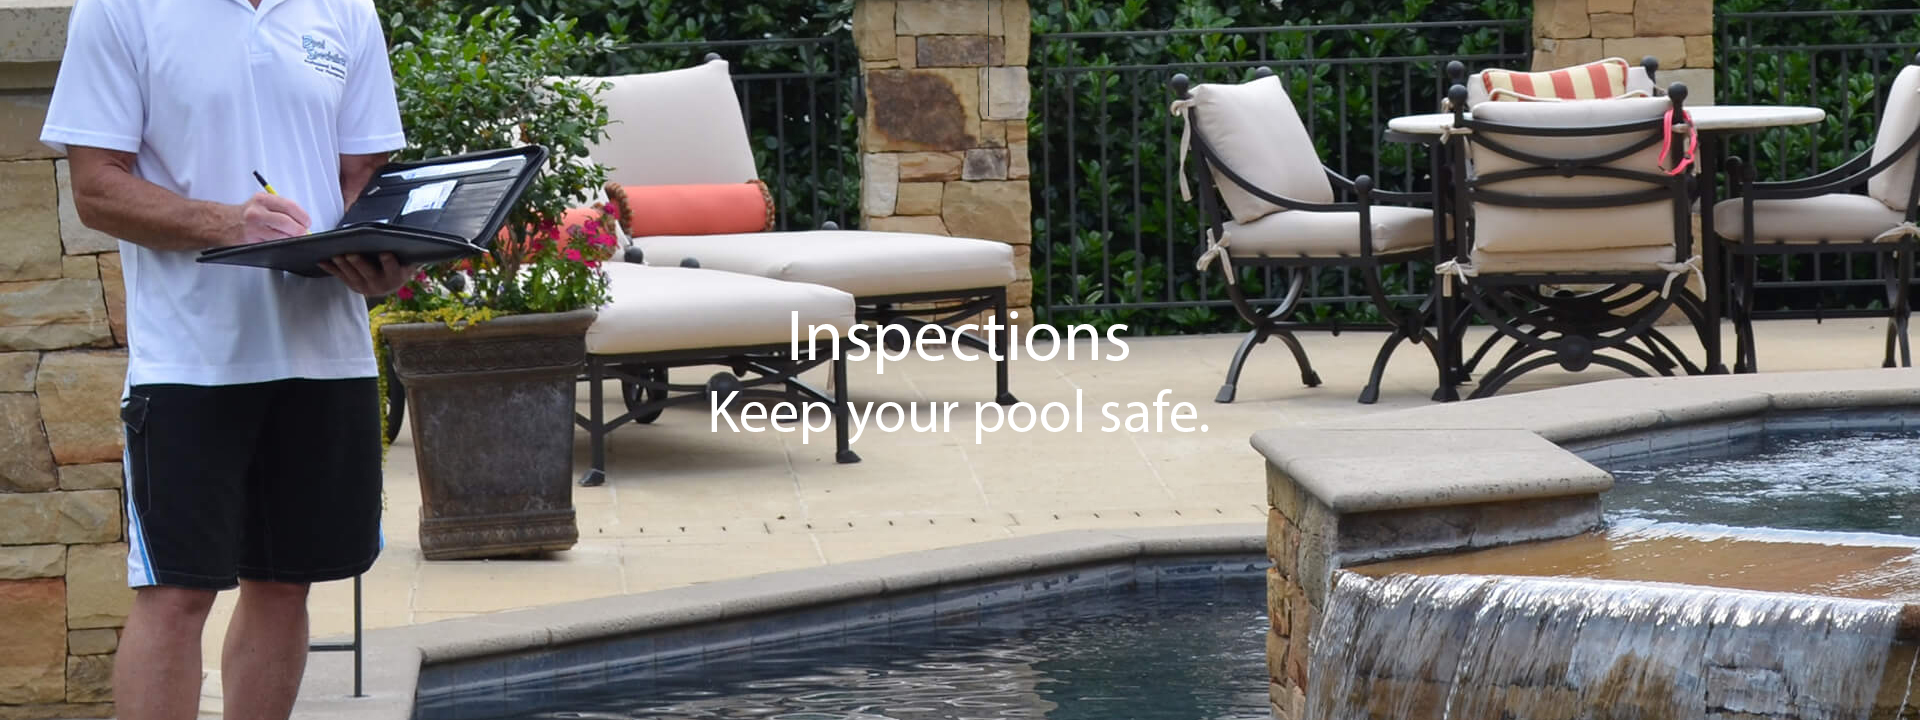  pool inspection raleigh